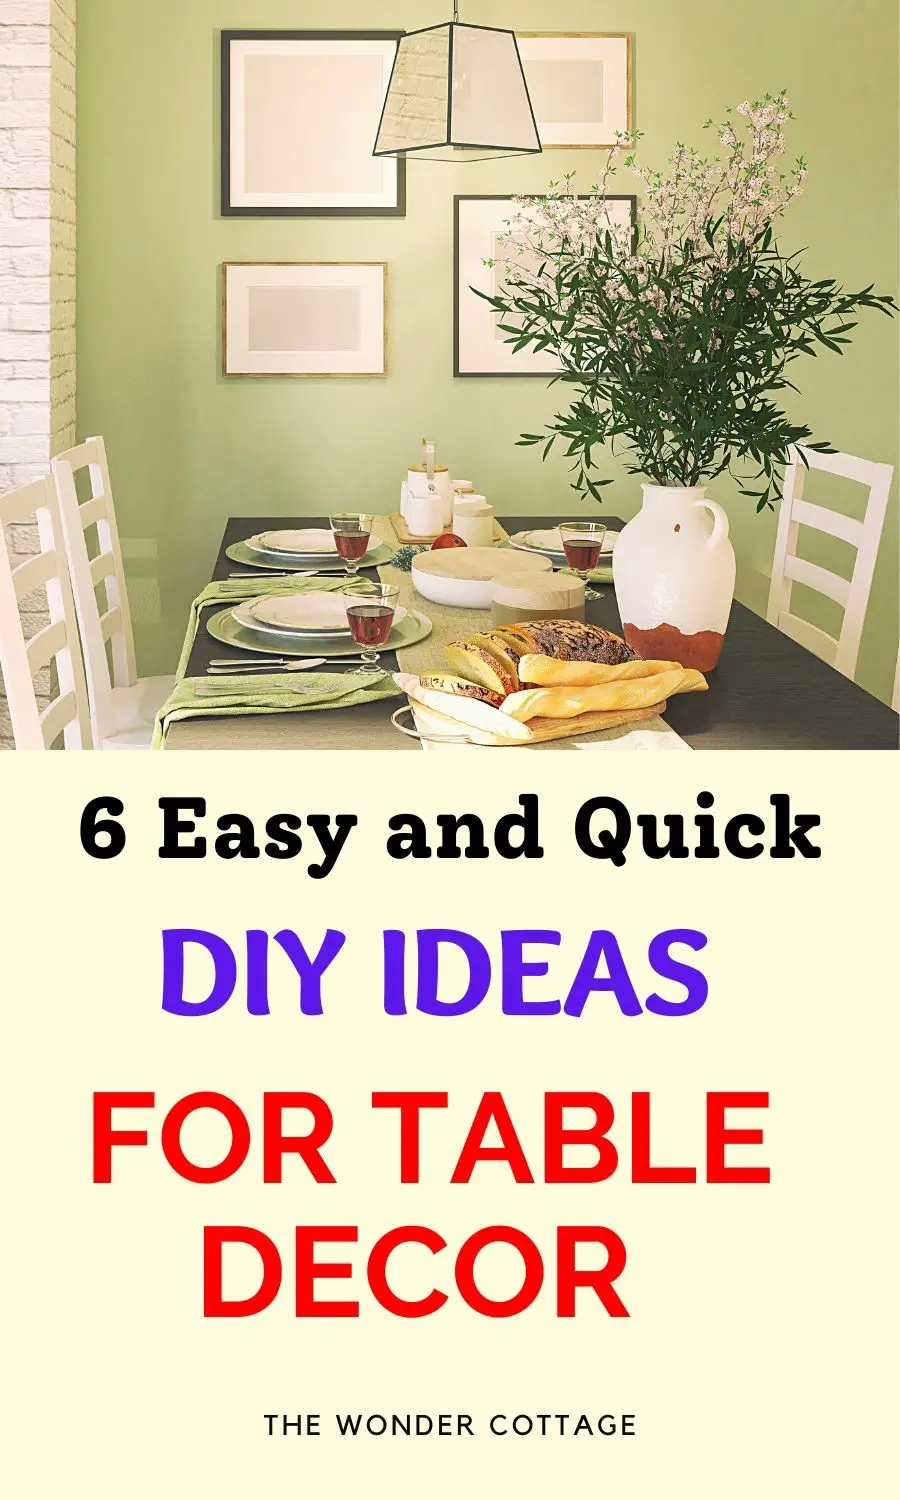 6 Easy and Quick DIY Ideas for Table Decor